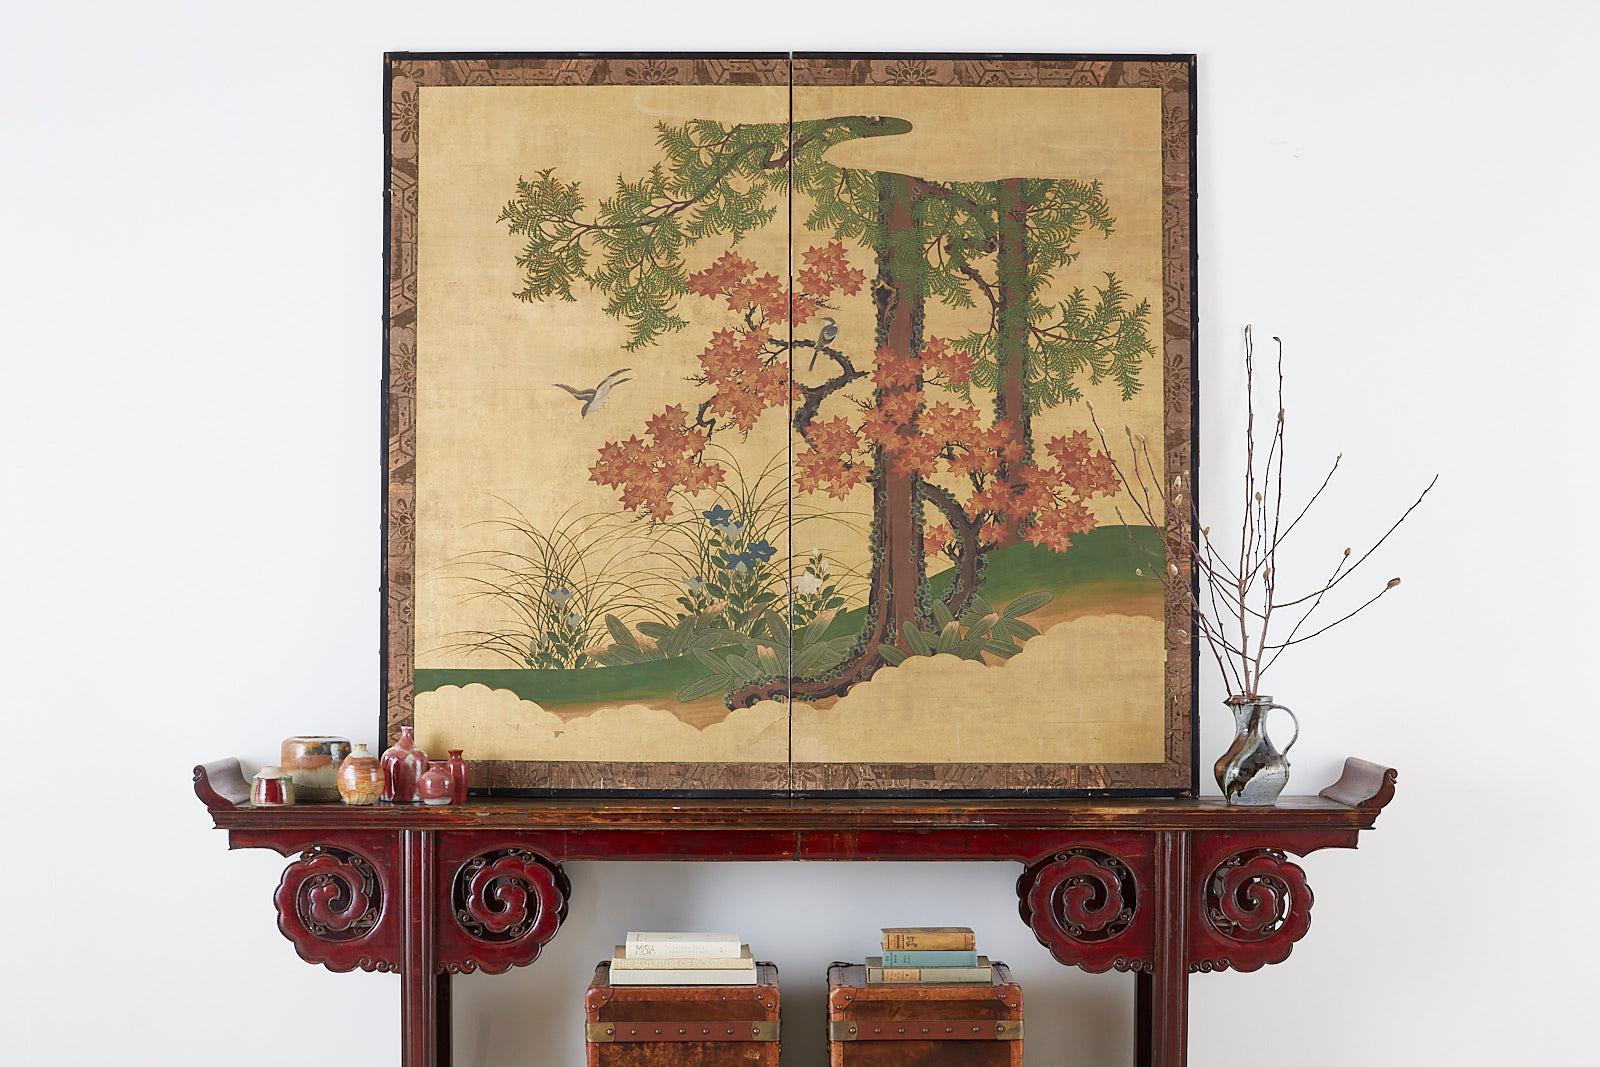 Late 19th century Japanese Meiji period two-panel screen depicting an autumn landscape with Japanese song birds. The screen features a Buddhist pine or Maki tree and a Japanese maple or momiji tree. Painted with ink and color over gold leaf squares